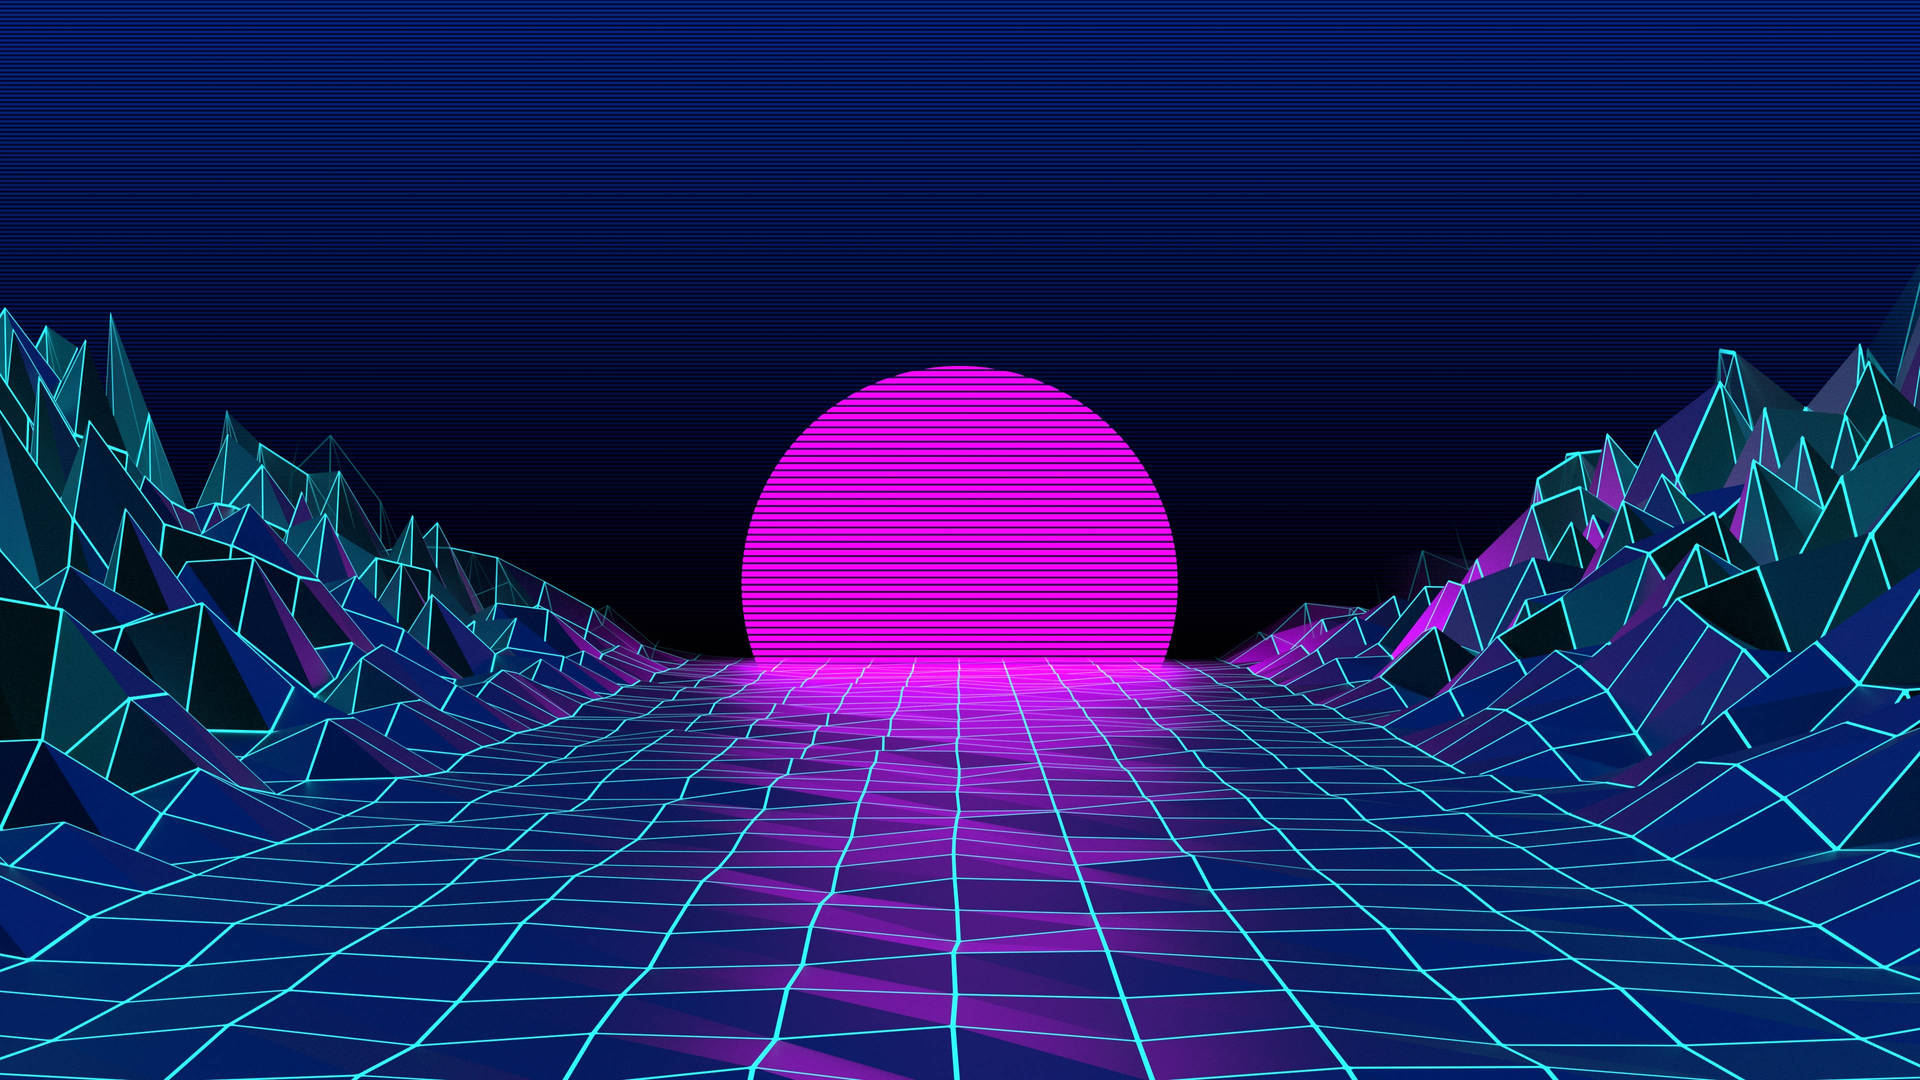 Retro Synthwave is here - Enjoy the Natural 80s Aesthetic Wallpaper